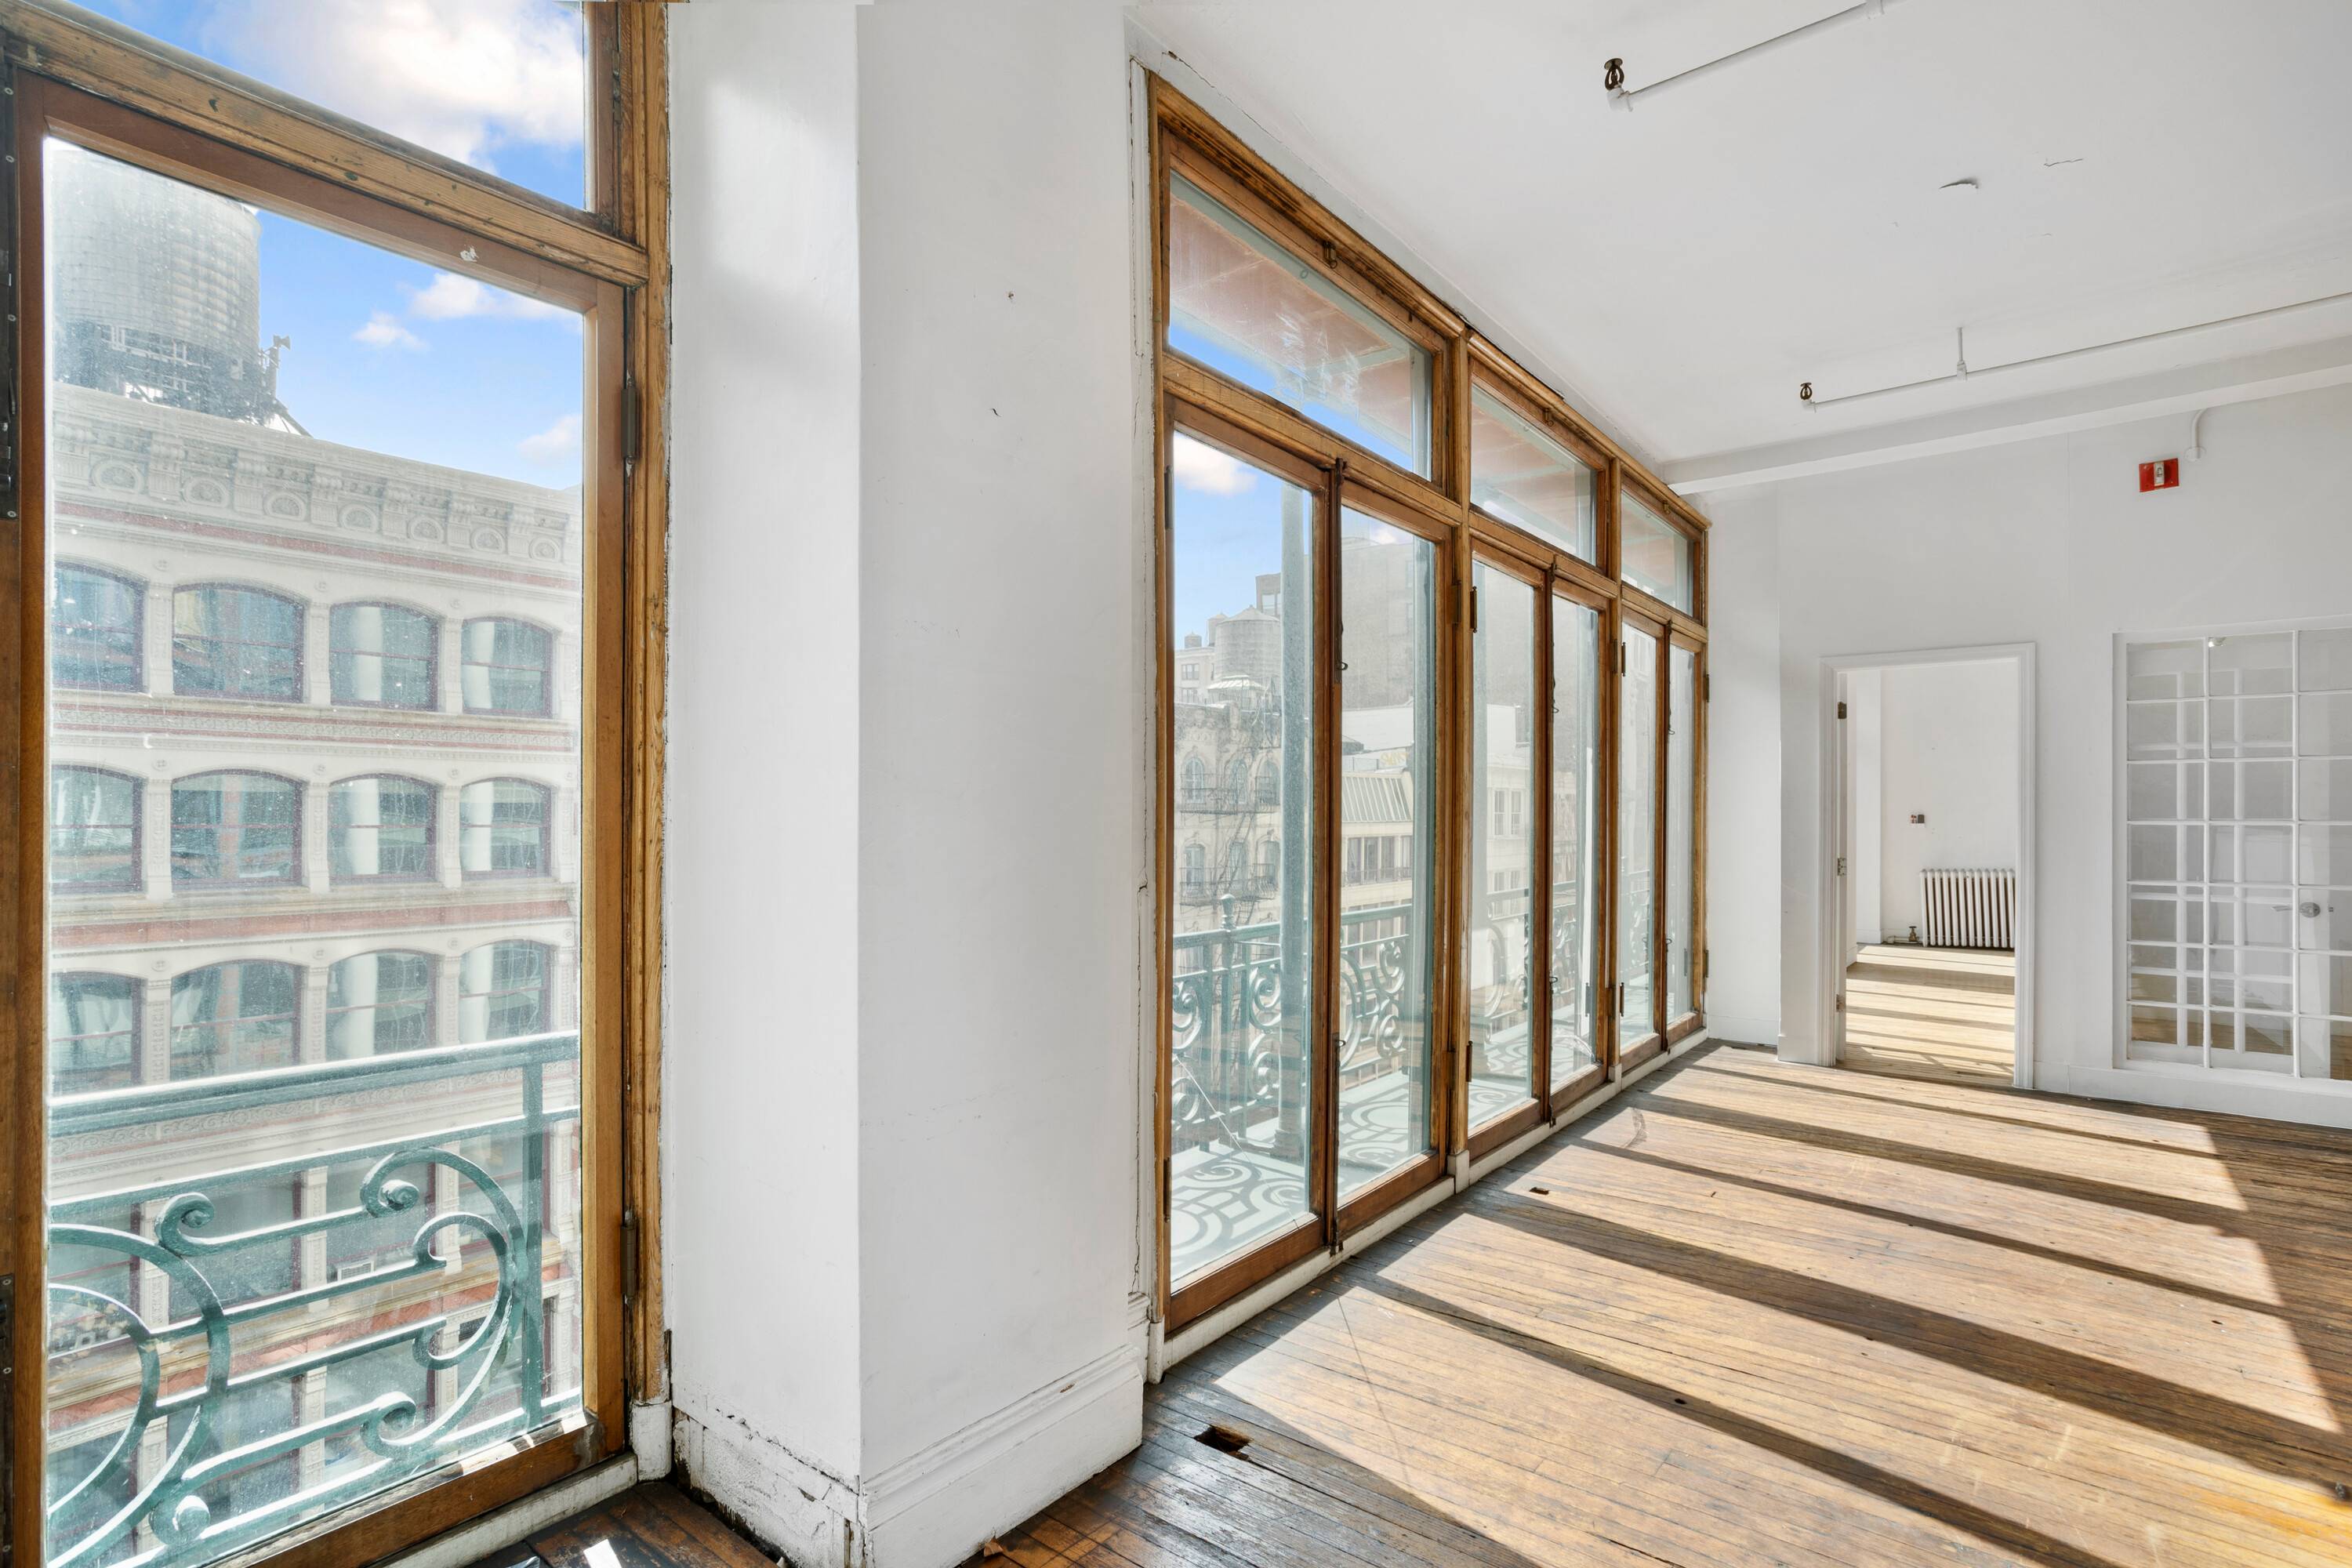 raw SOHO LOFT Offering - $5.95mm 8,016 sq ft commercial / retail, live / work space in prime Soho - 561 Broadway AKA 88 Prince Street